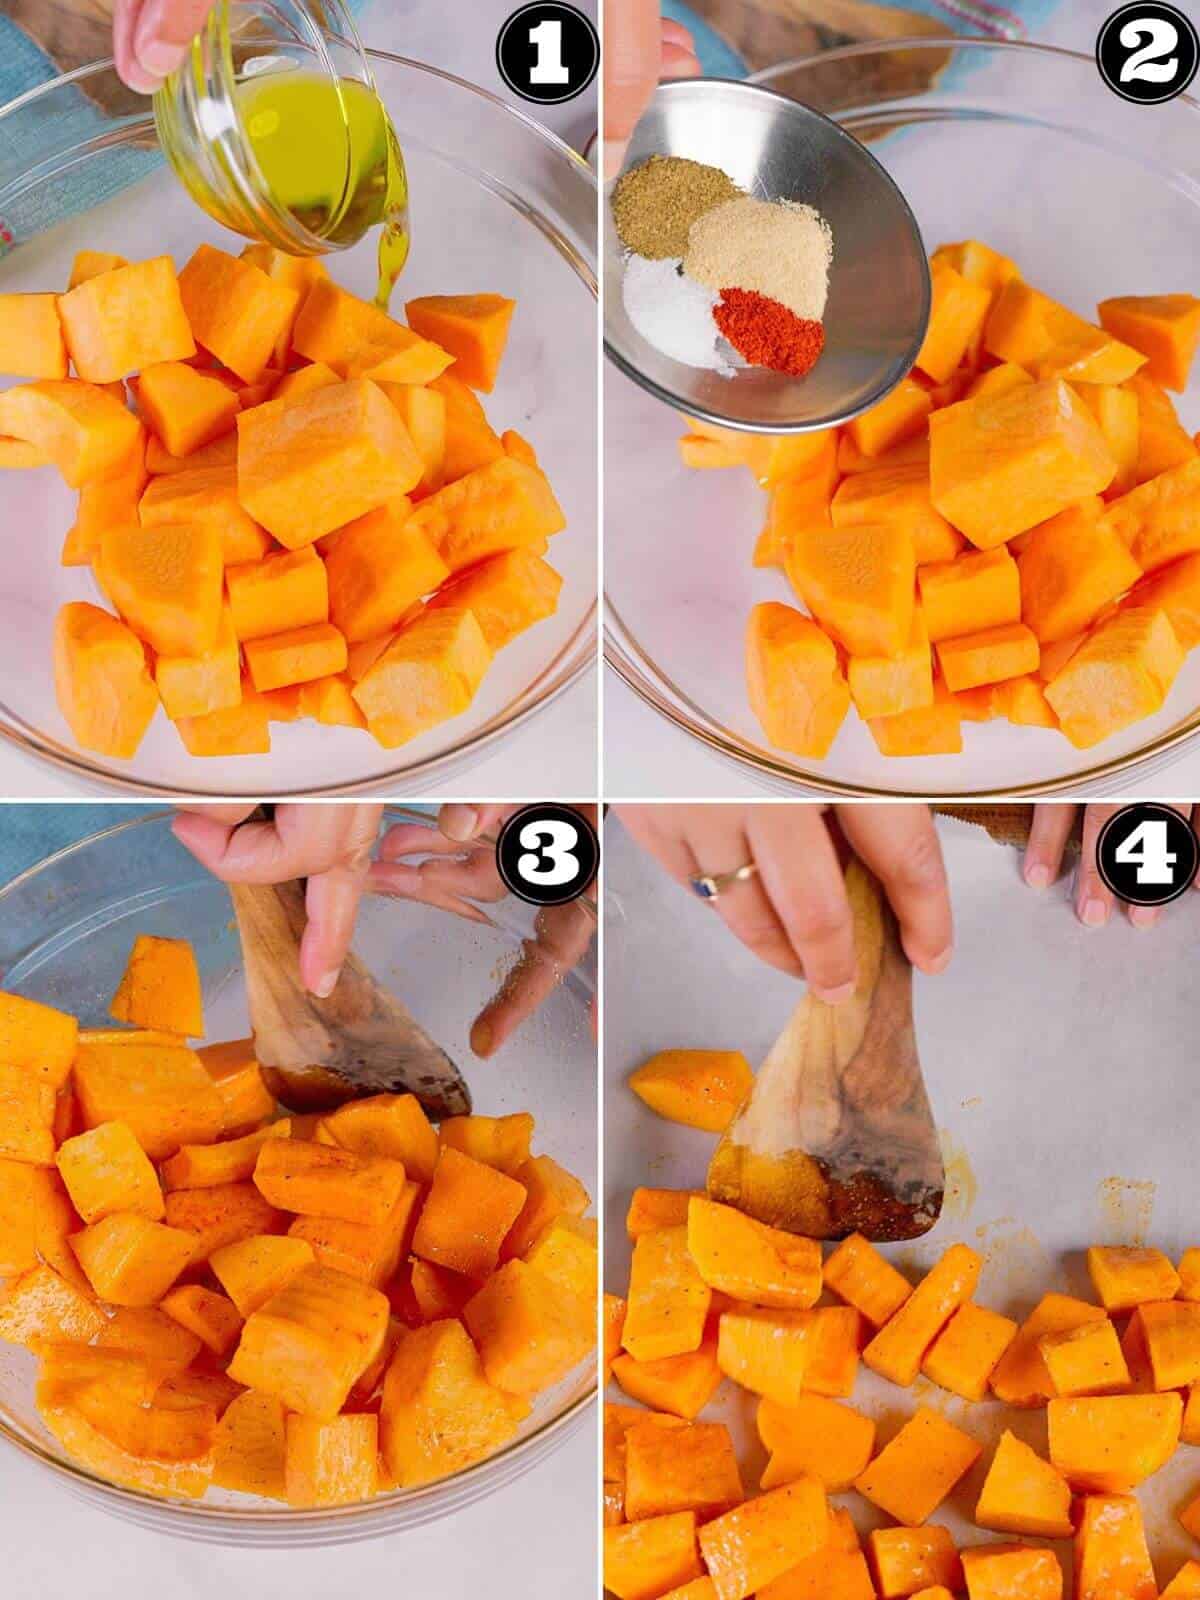 Making of the roasted pumpkin.